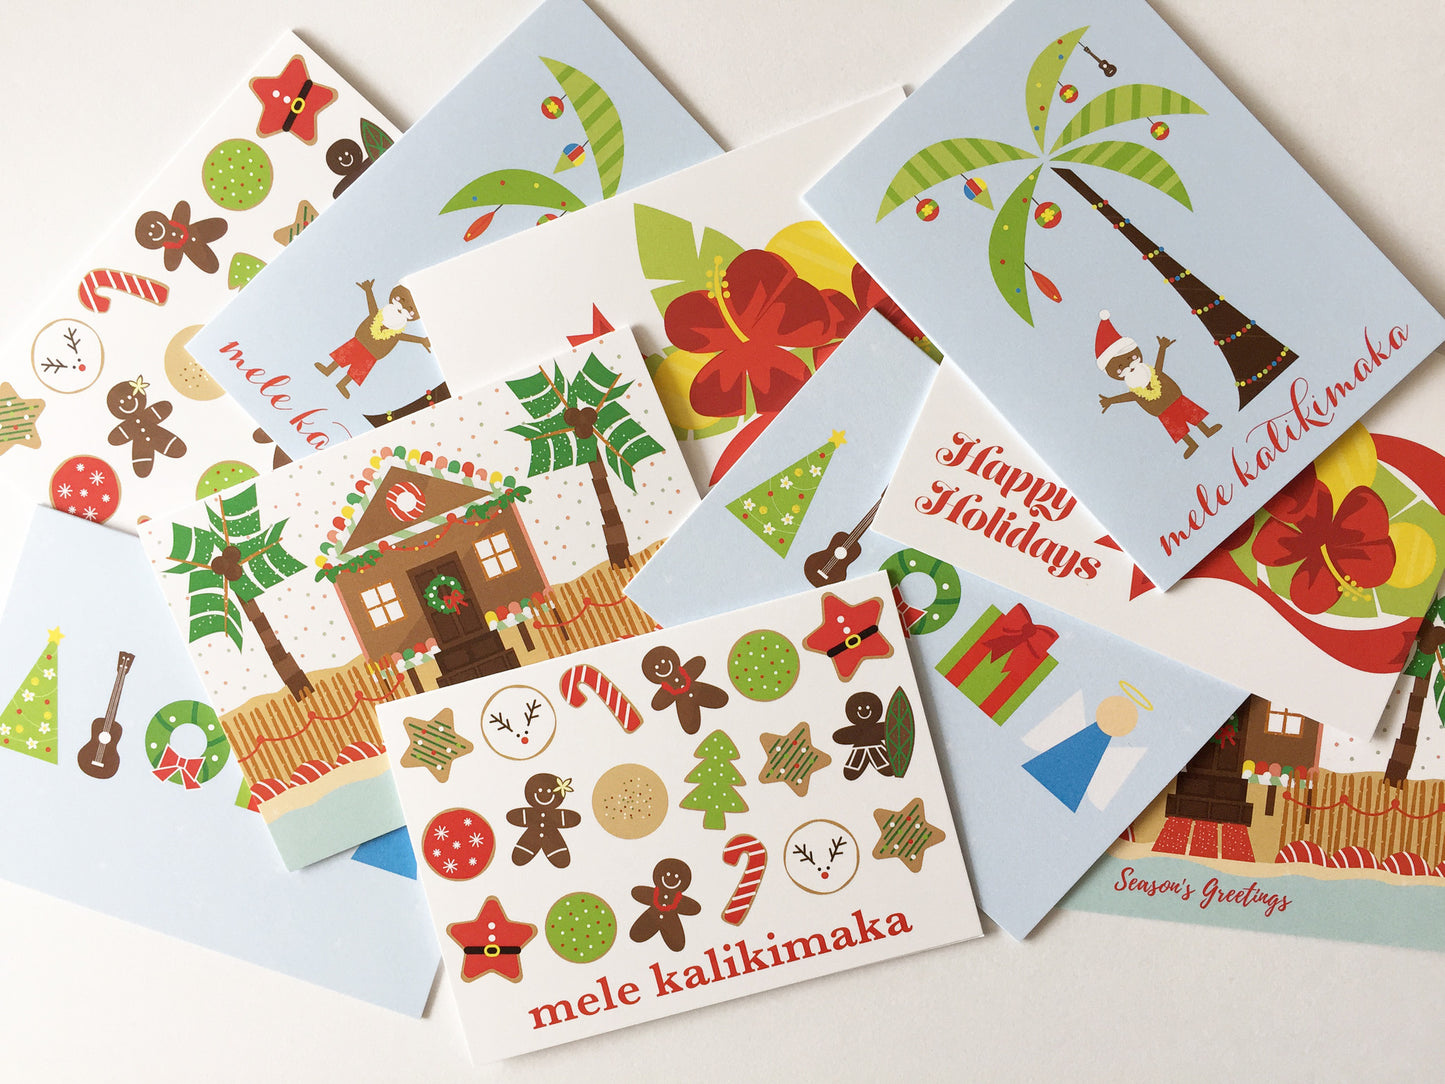 Assorted Holiday Card Set